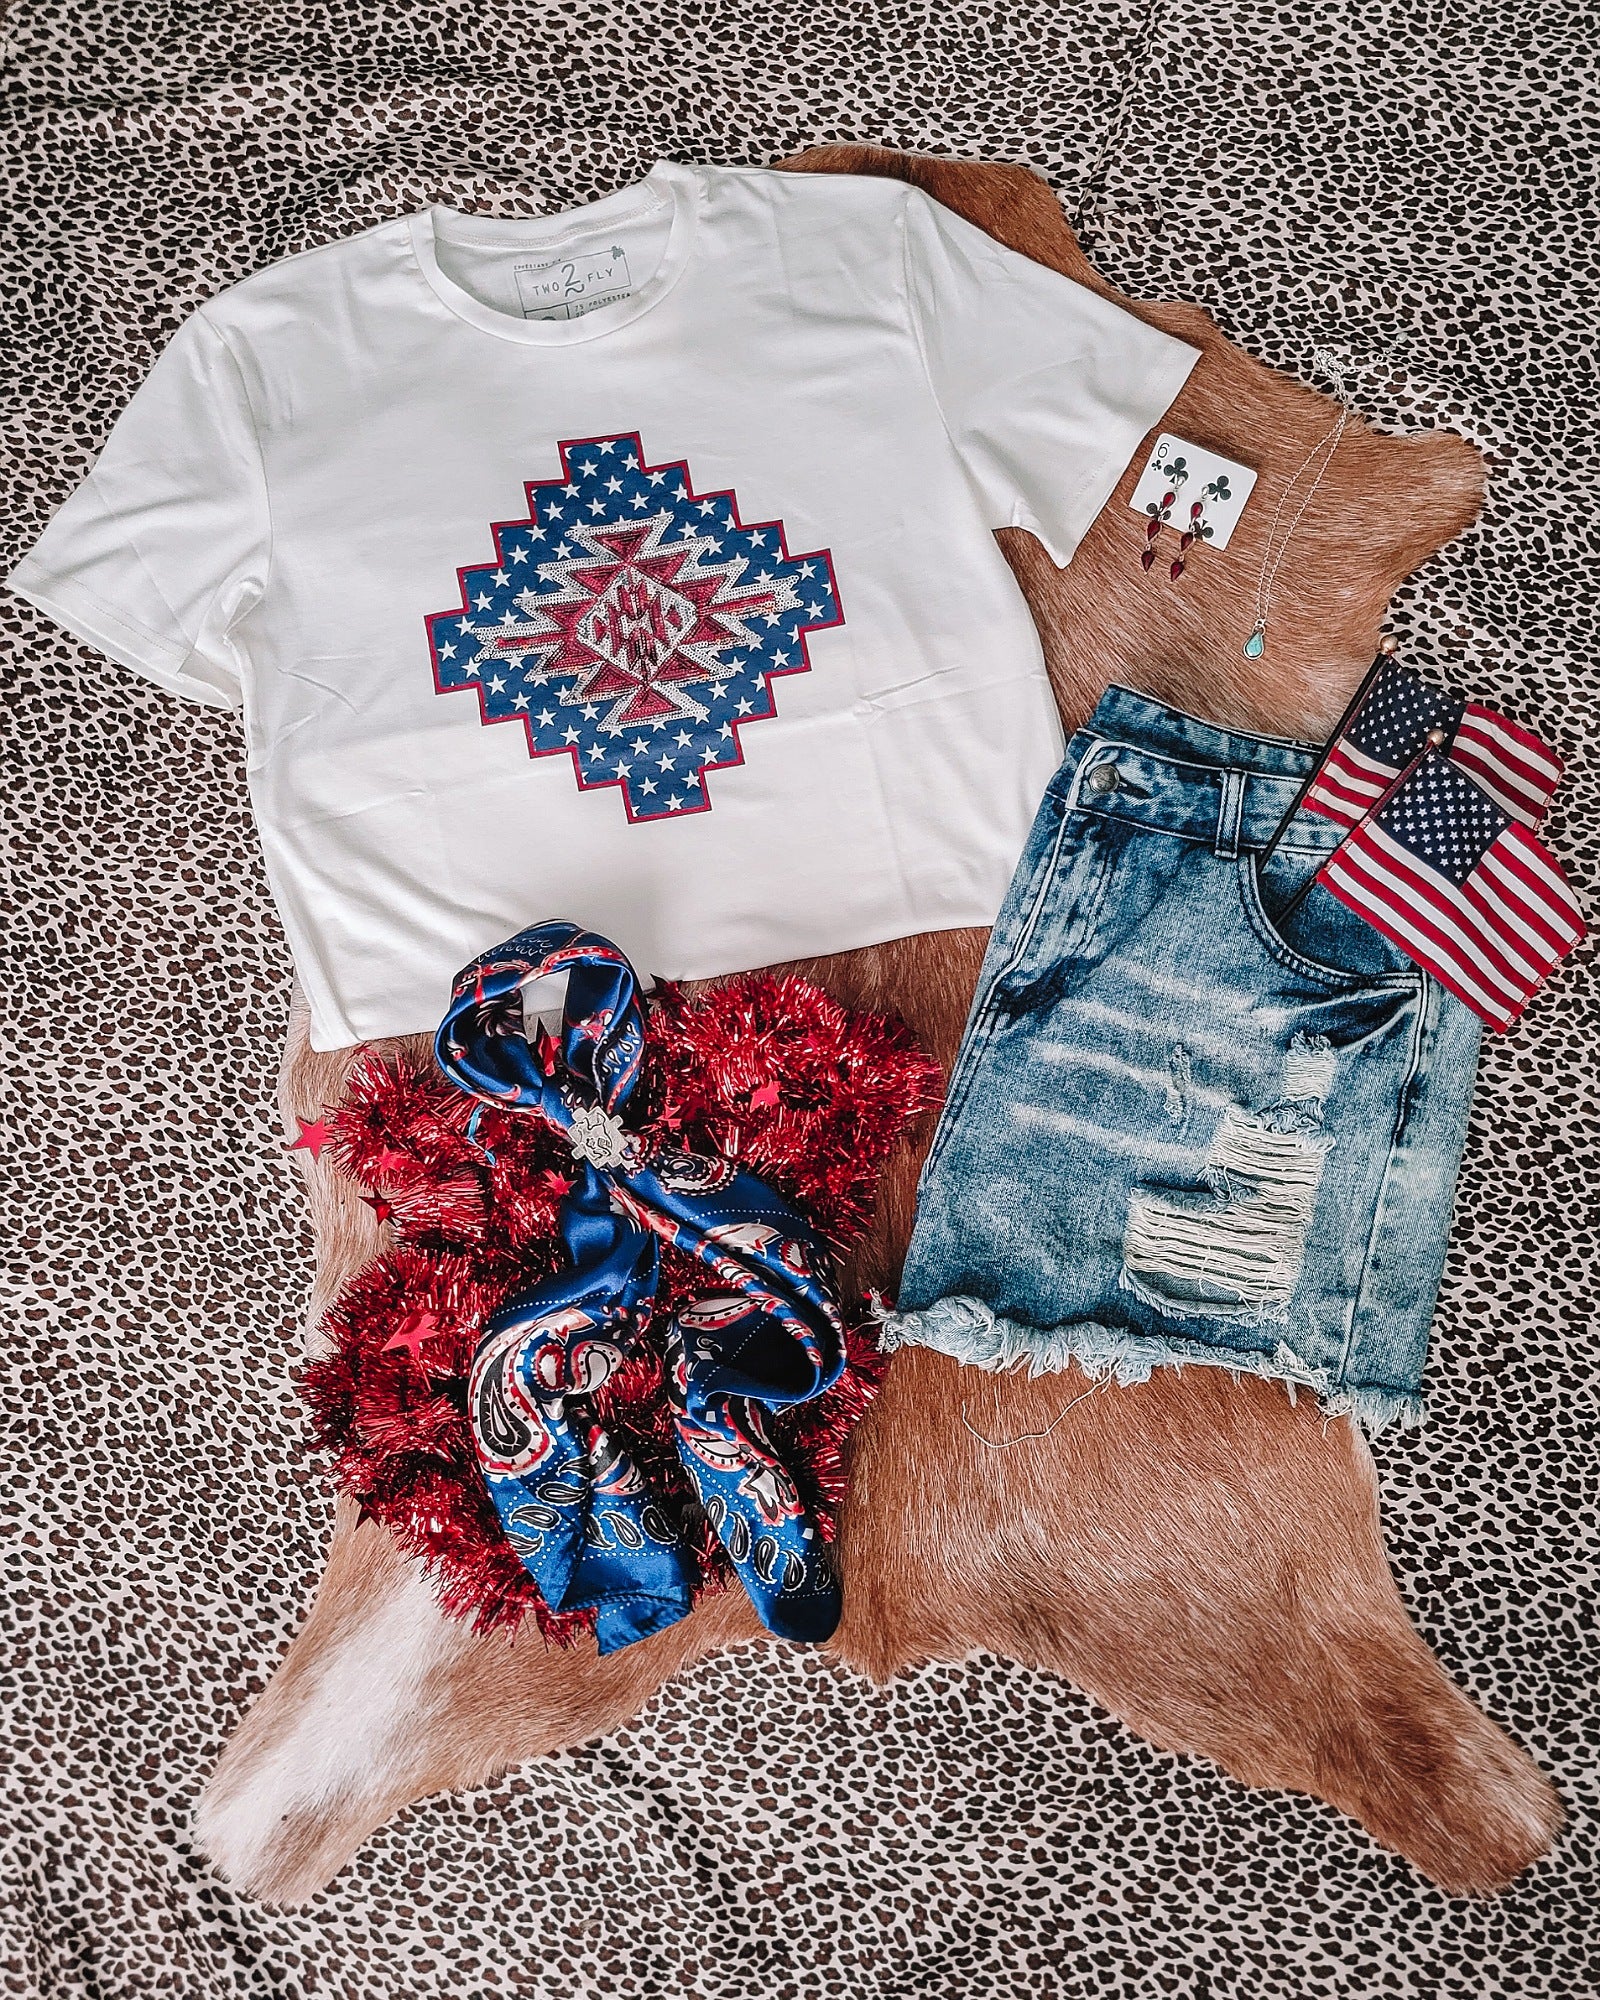 Star Spangled Sequins Graphic Tee